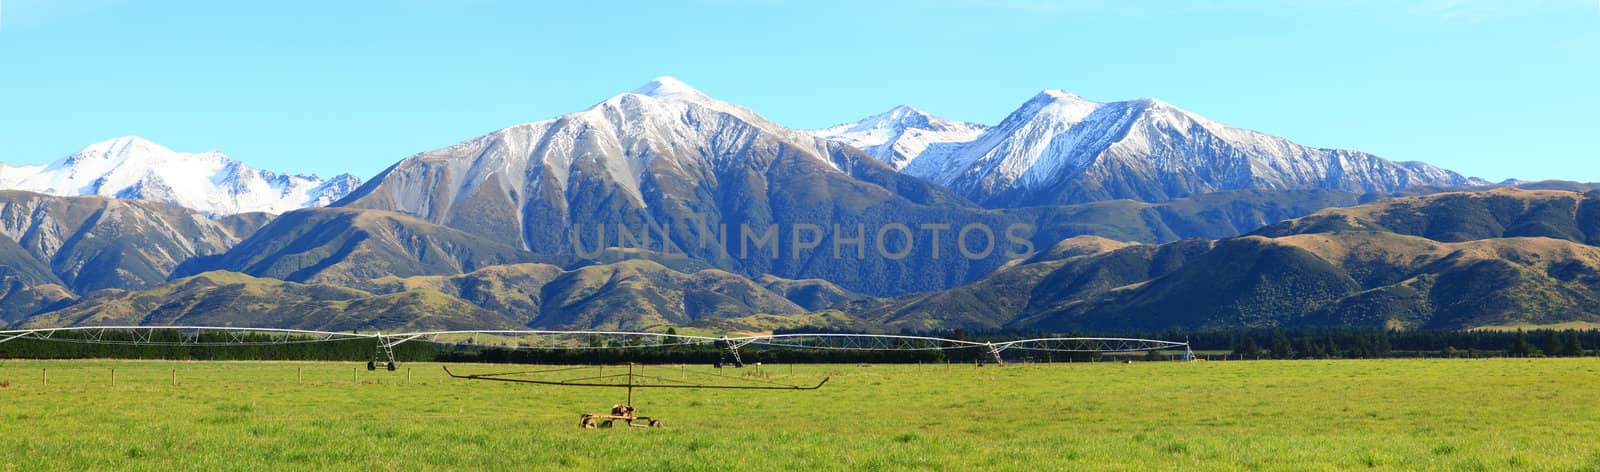 southern alps panorama by vichie81